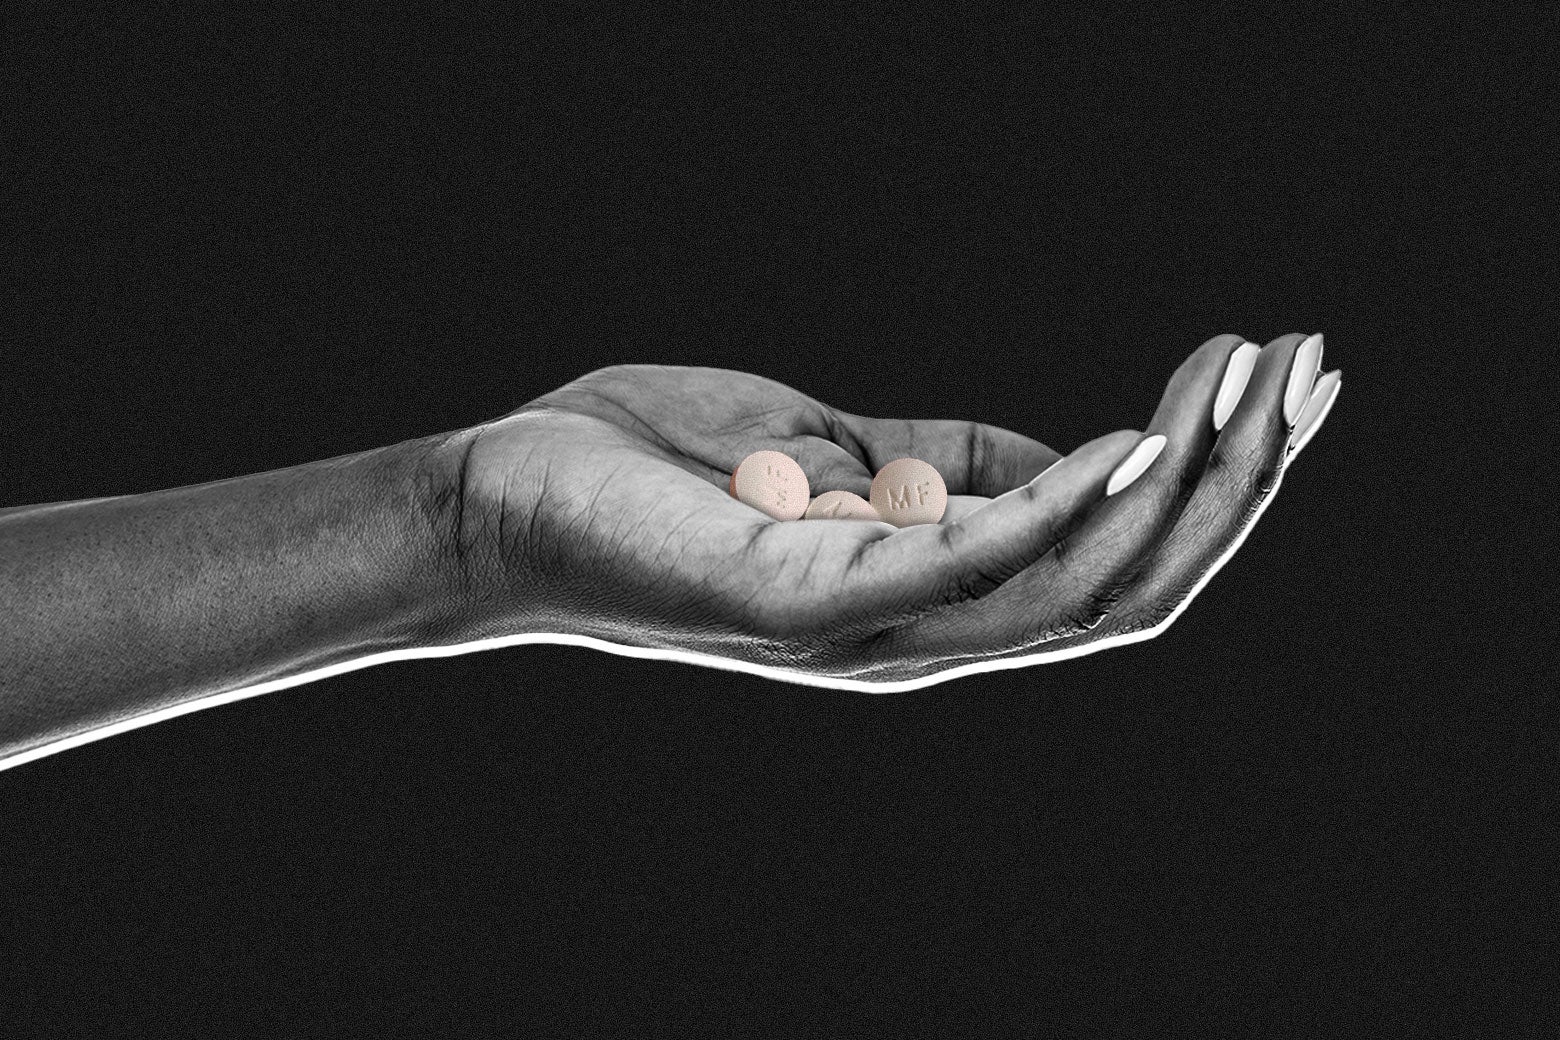 A hand holding out a mifepristone pill.